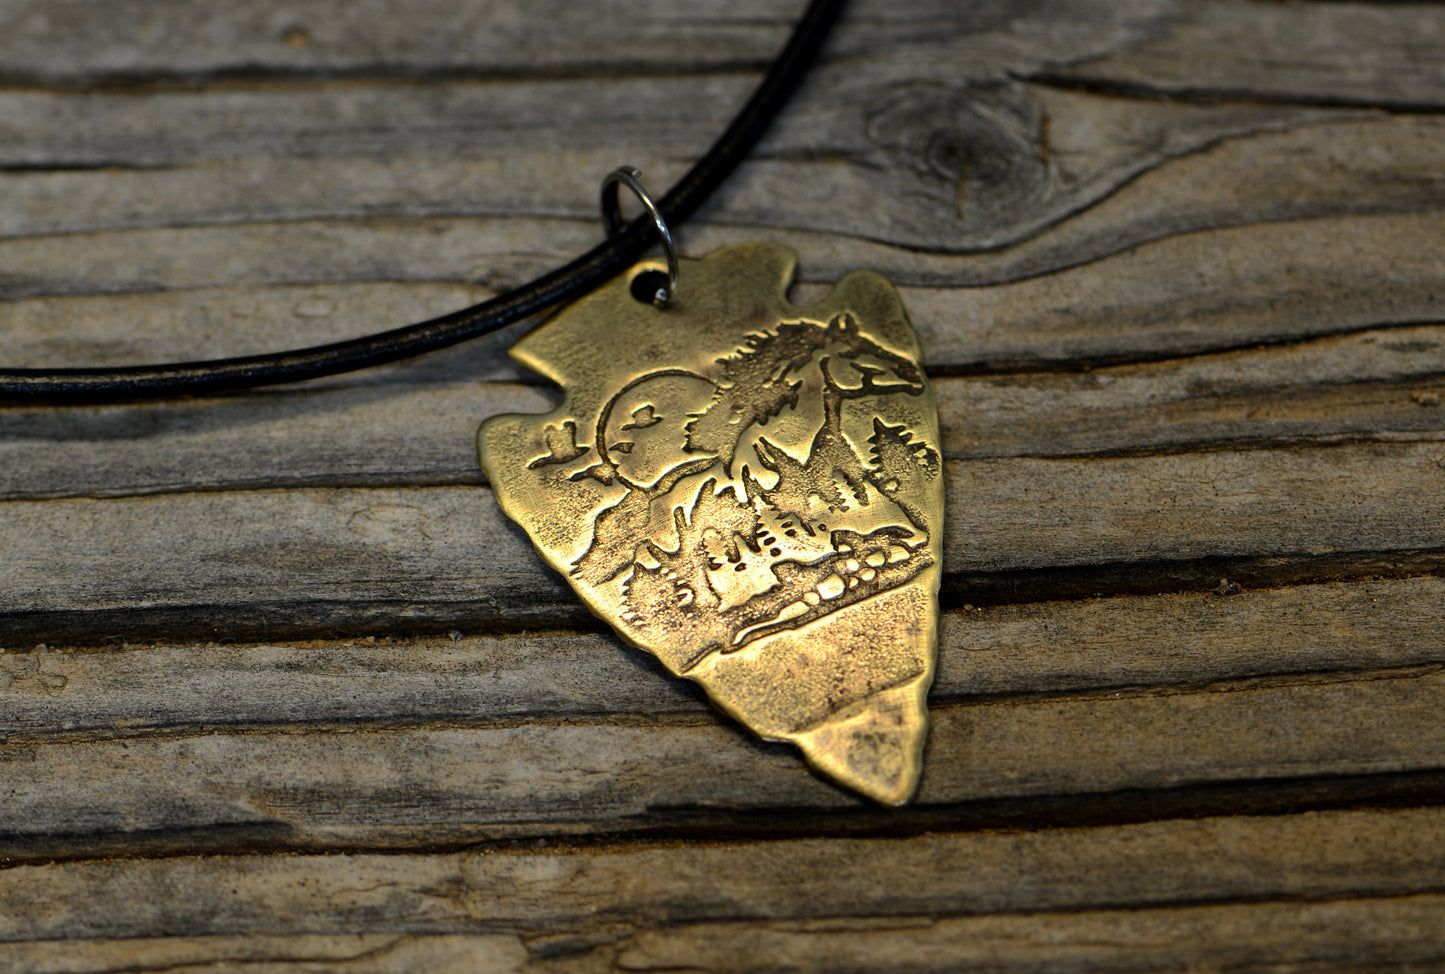 Bronze arrowhead necklace with horses and mountains